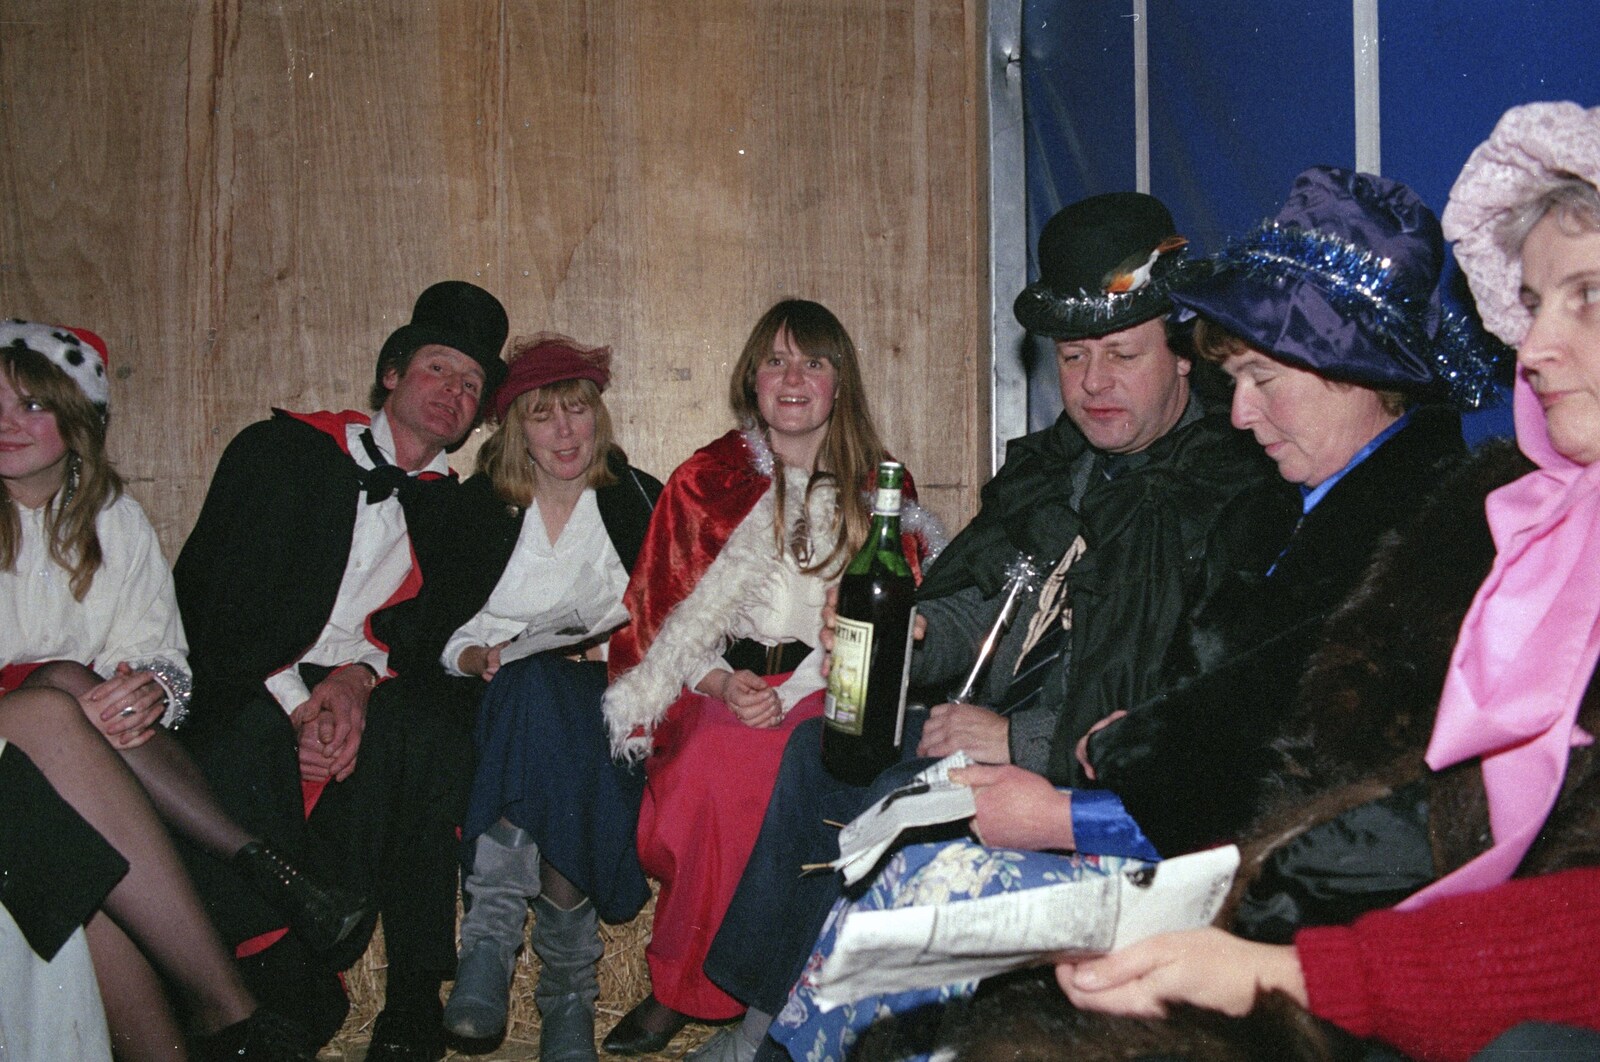 More booze is passed around in the van from Carol Singing and Late Night Shopping, Stuston, Diss and Harleston, Norfolk - 16th December 1990